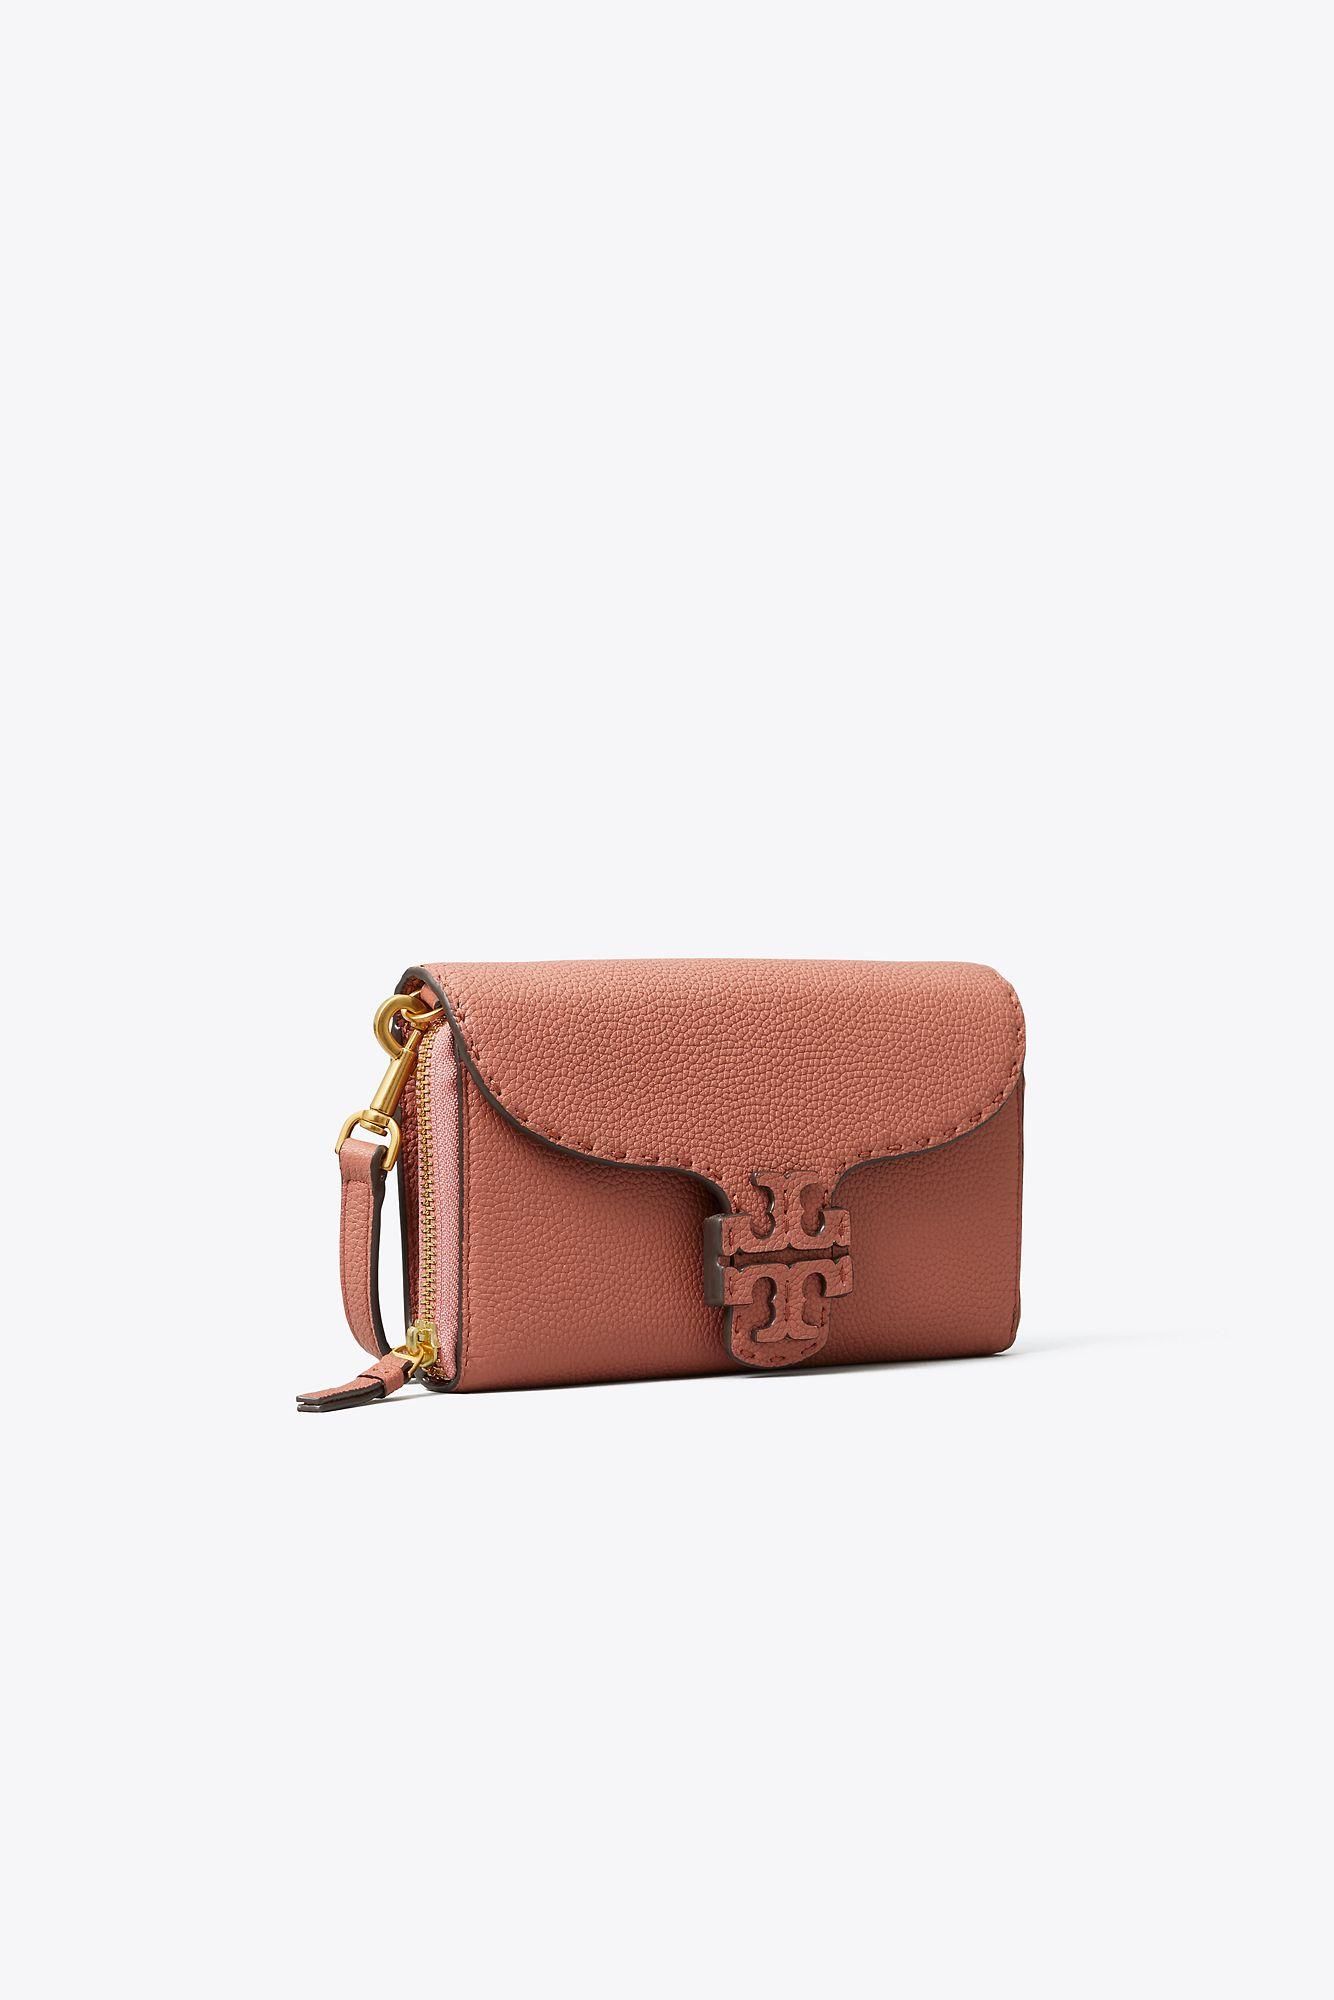 Tory Burch Leather Mcgraw Wallet Crossbody in Brown - Lyst